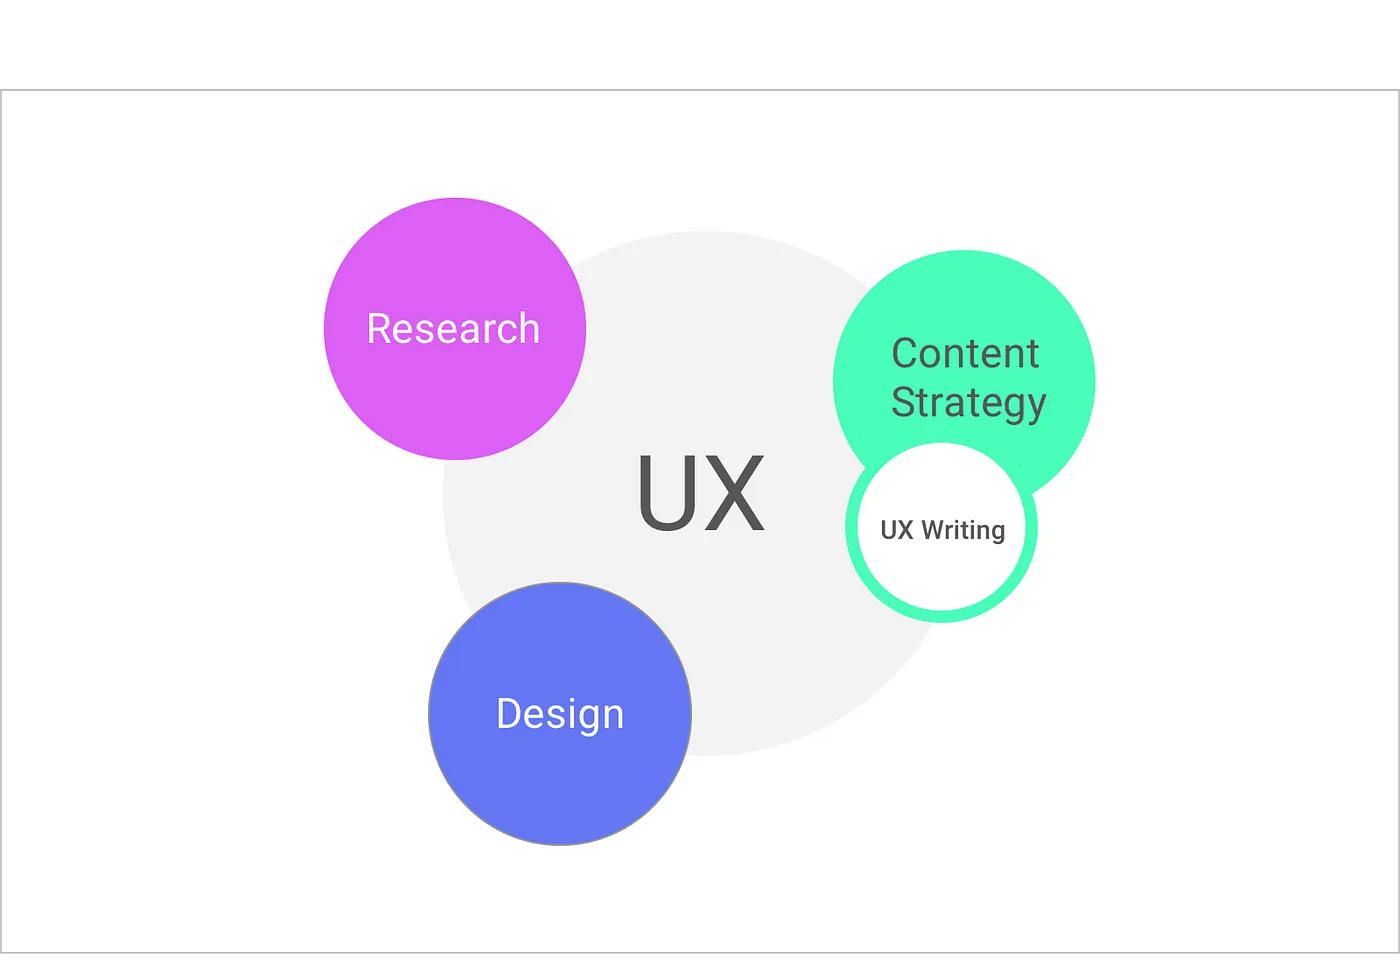 How UX writing relates to user experience design